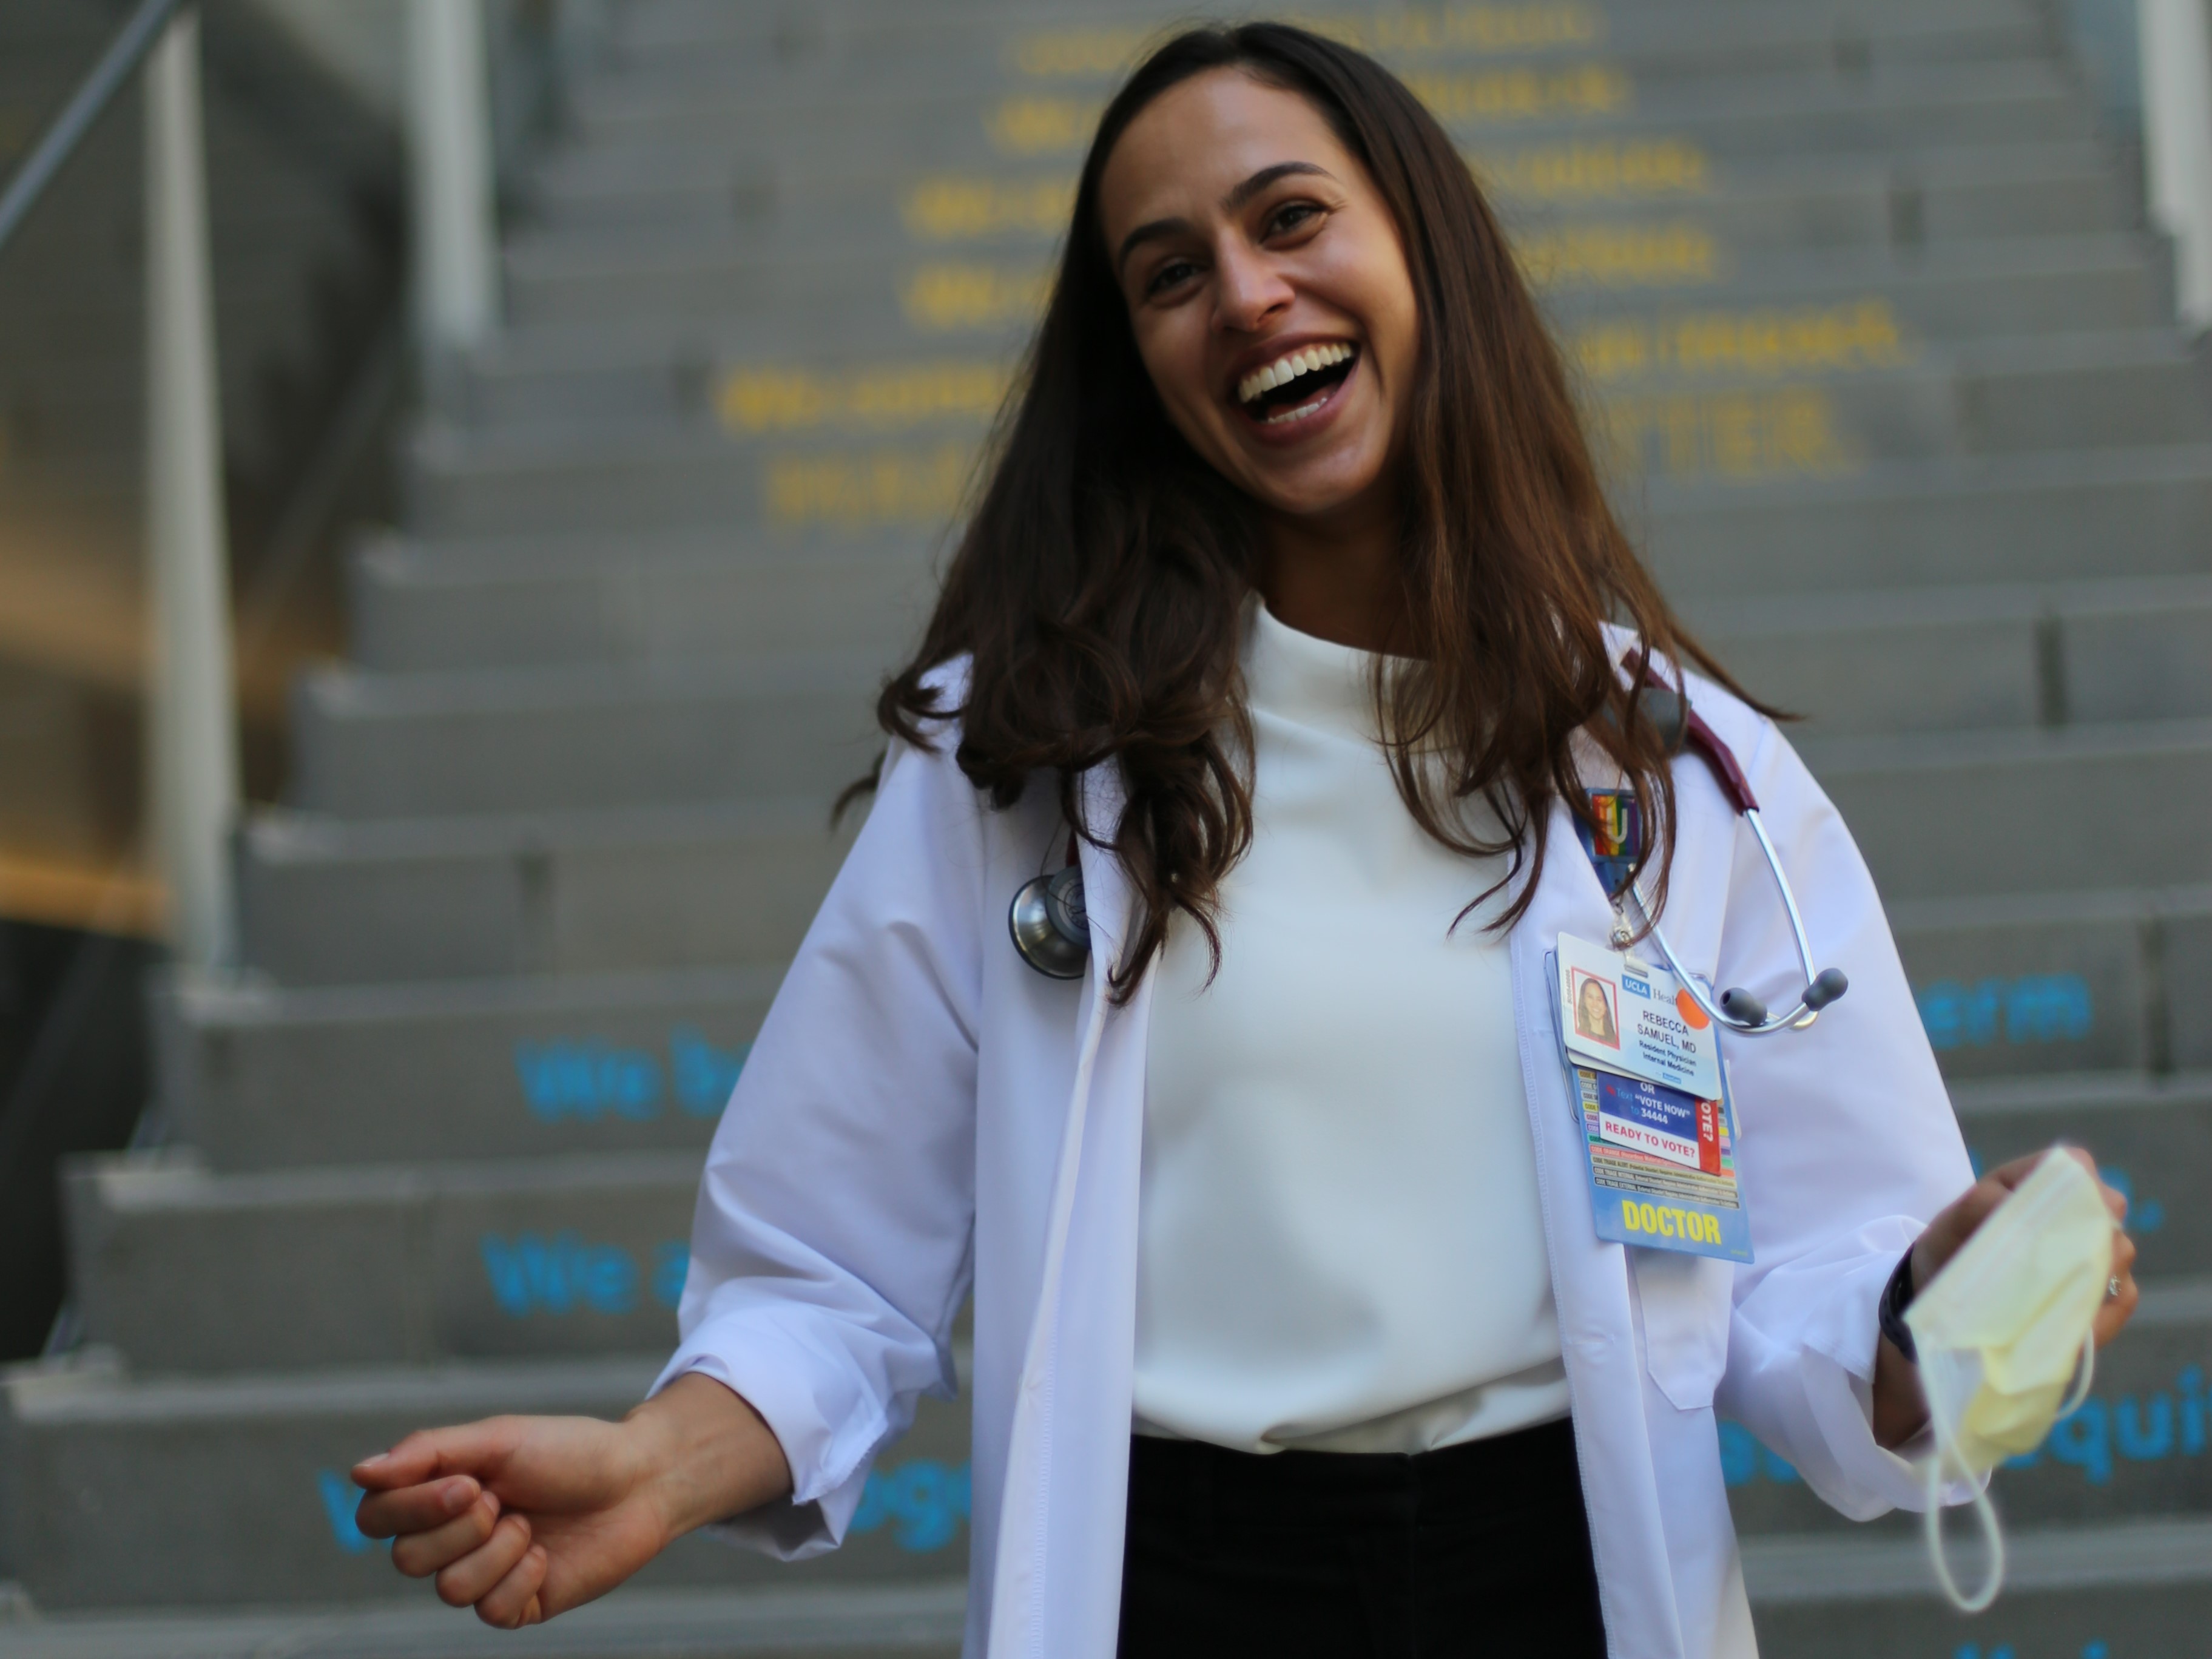 Incoming medical school resident with badge